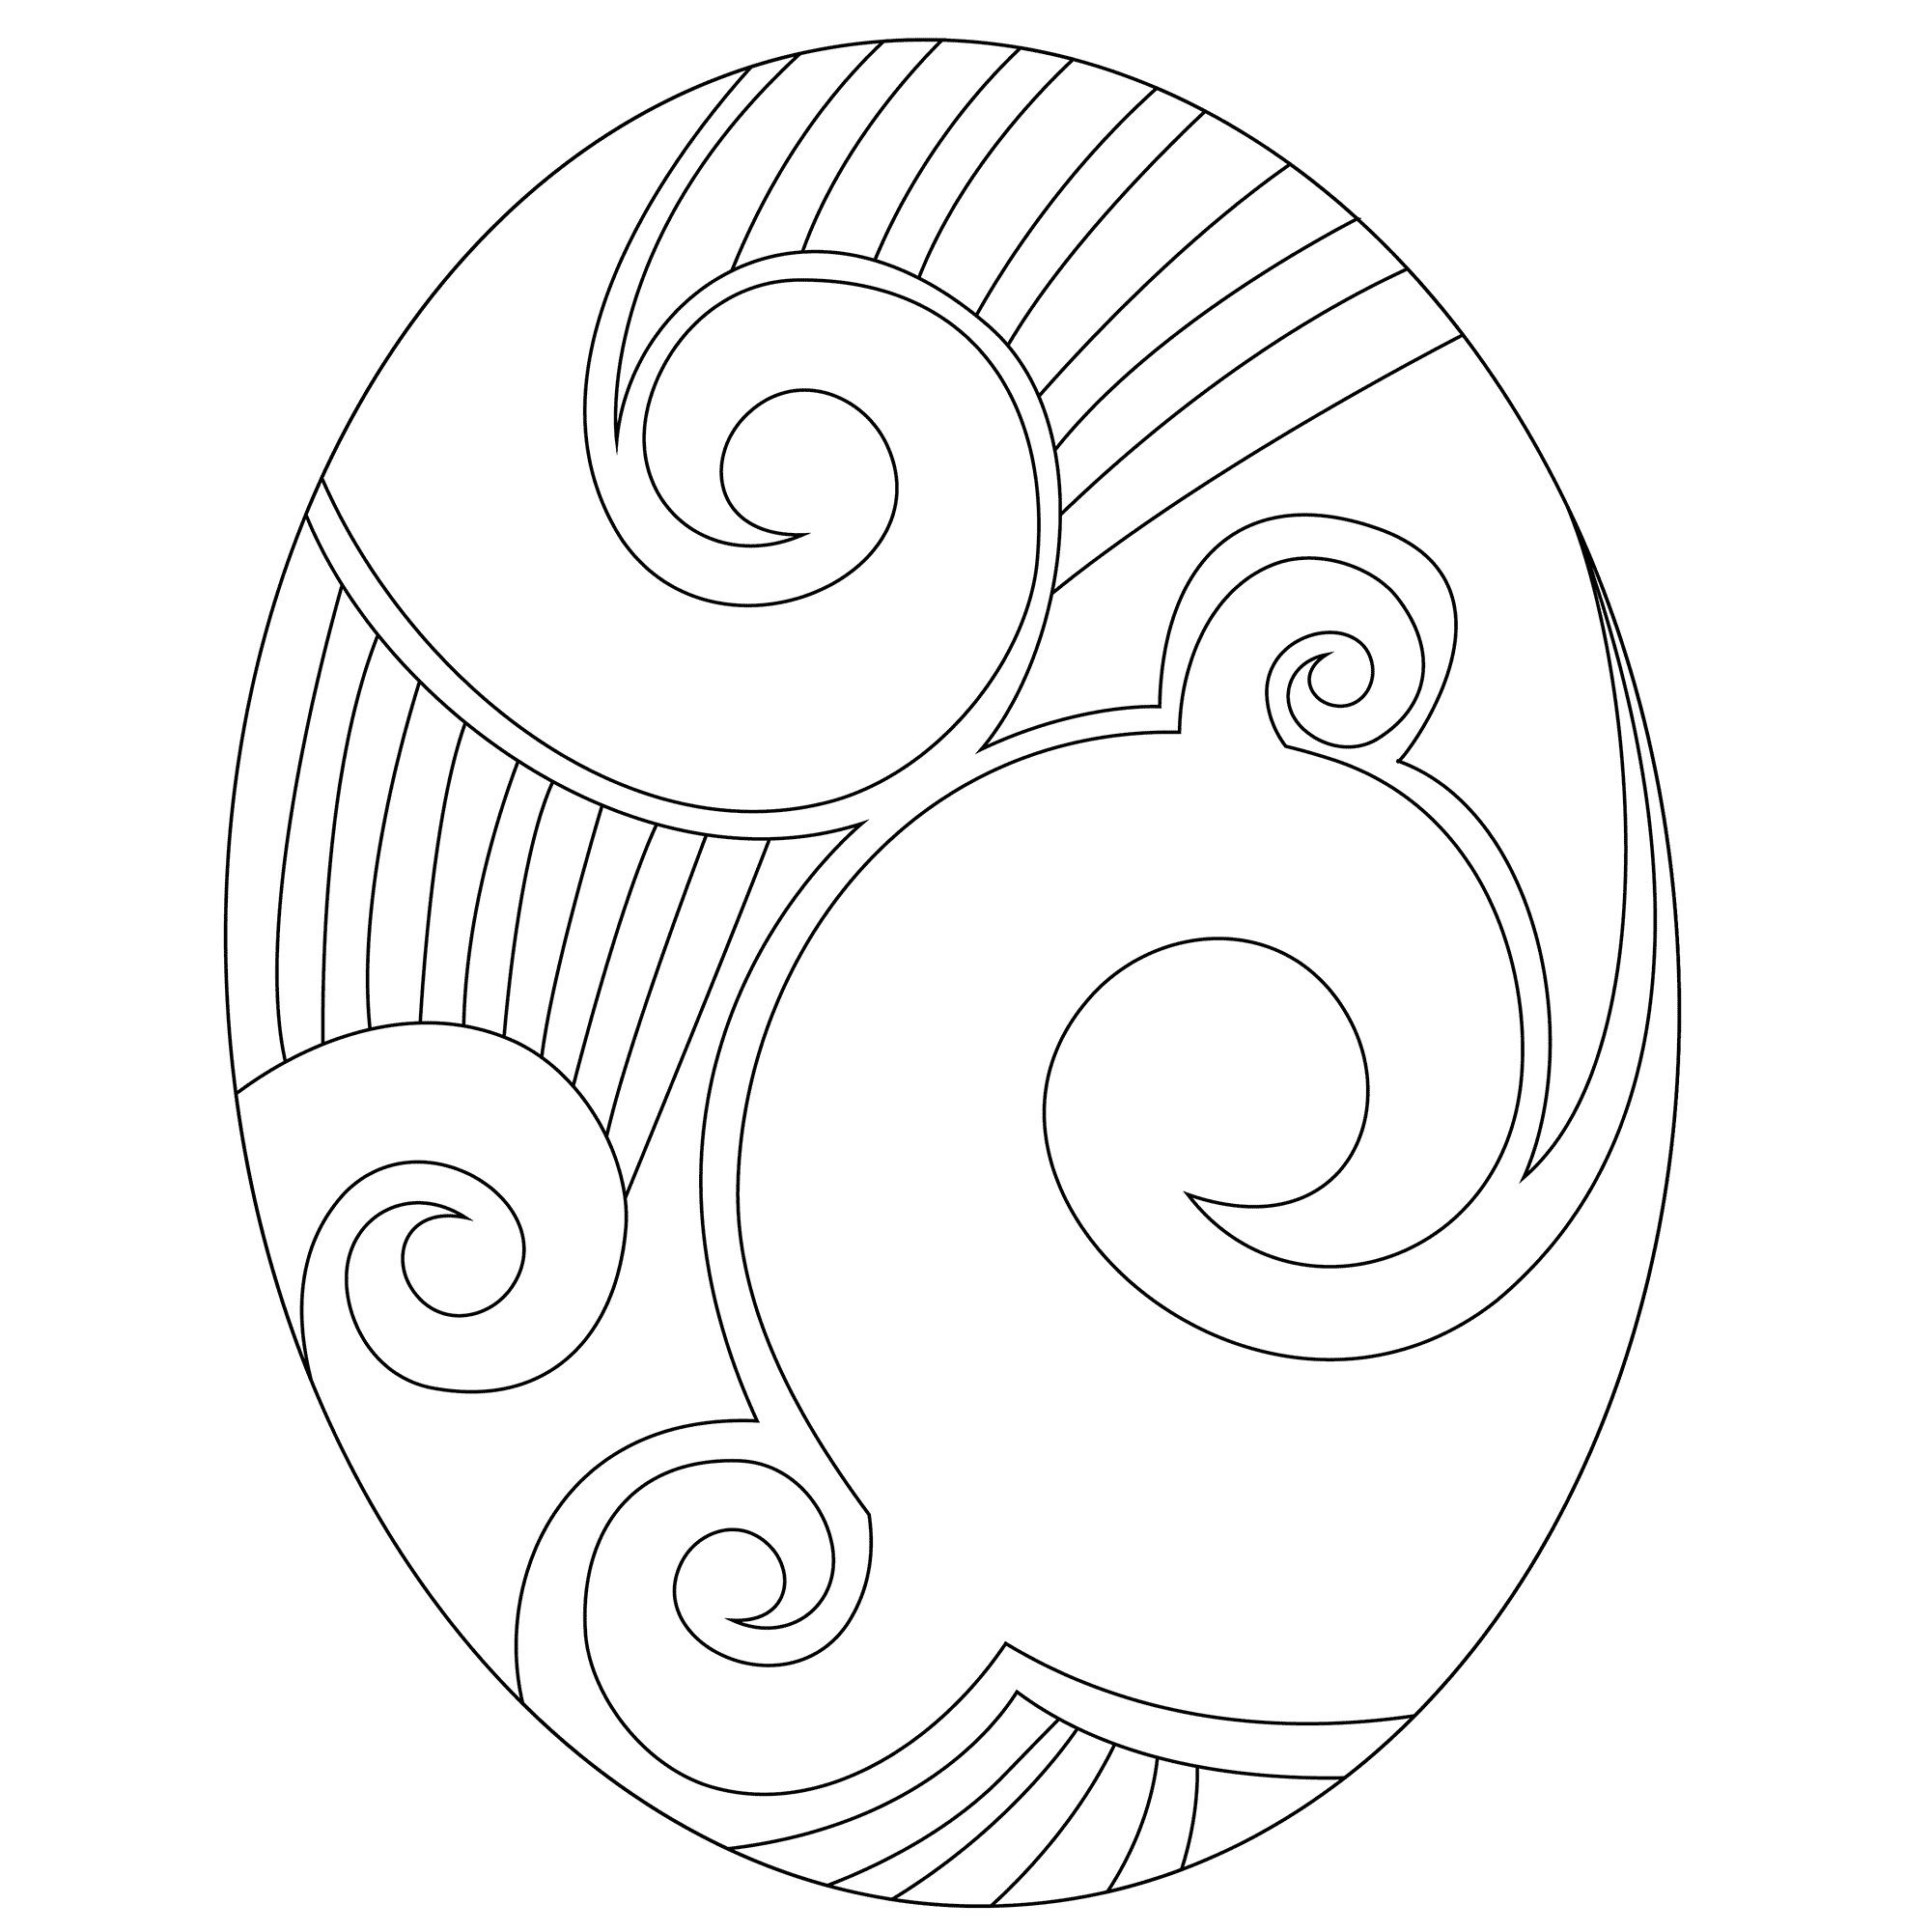 Easter Egg Coloring Pages Holiday Easter Egg Swirl Printable 2021 0505 Coloring4free